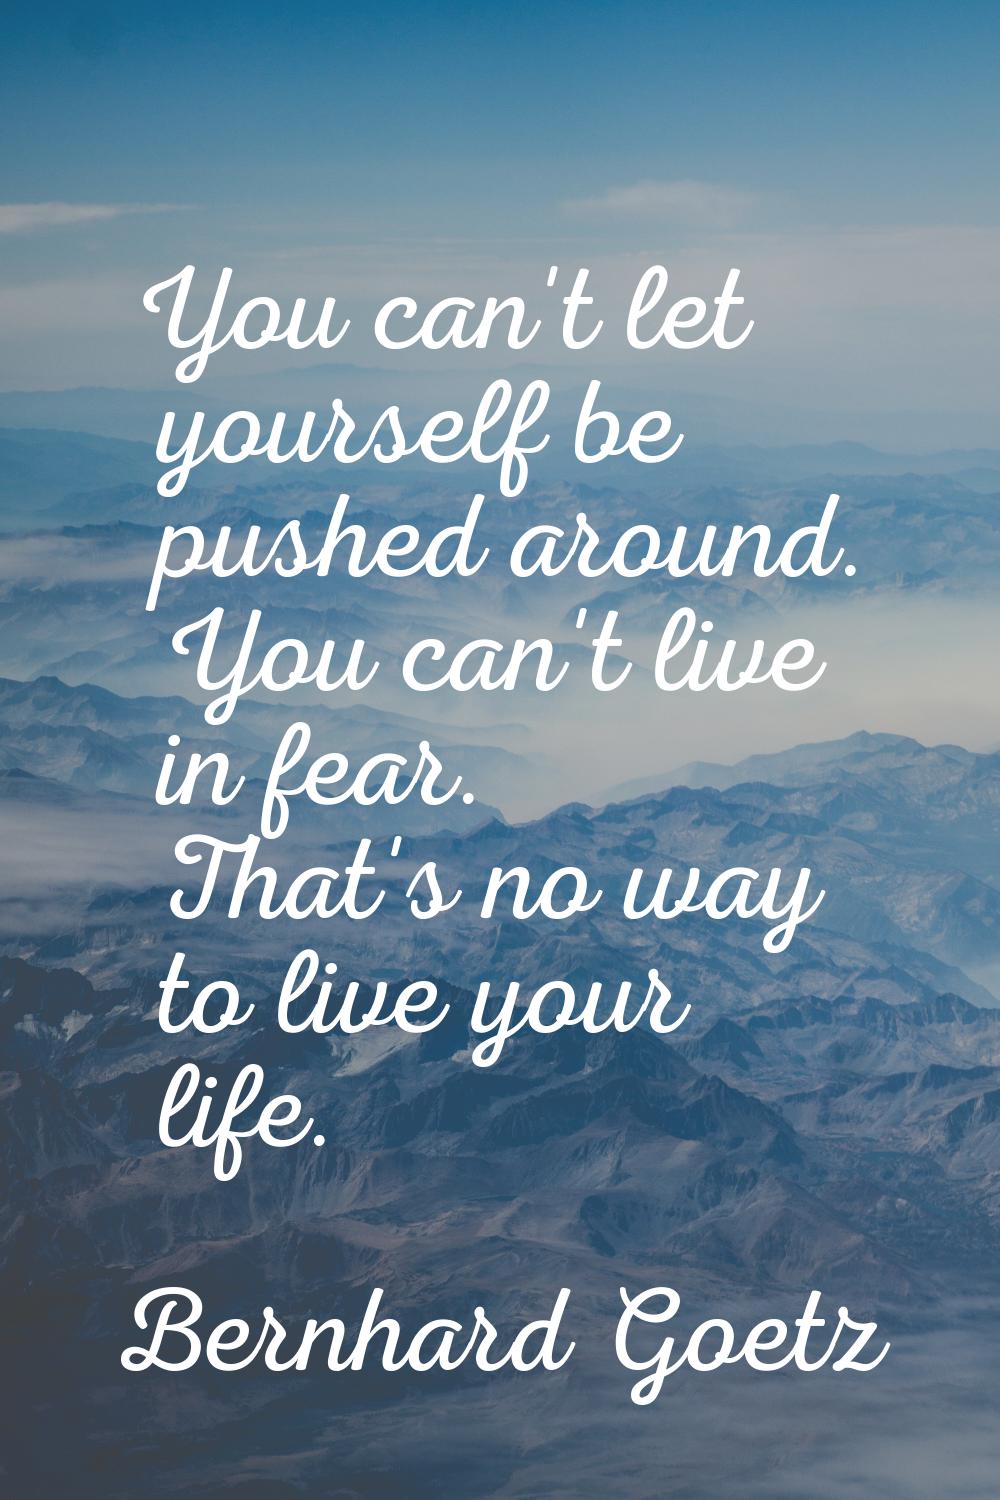 You can't let yourself be pushed around. You can't live in fear. That's no way to live your life.